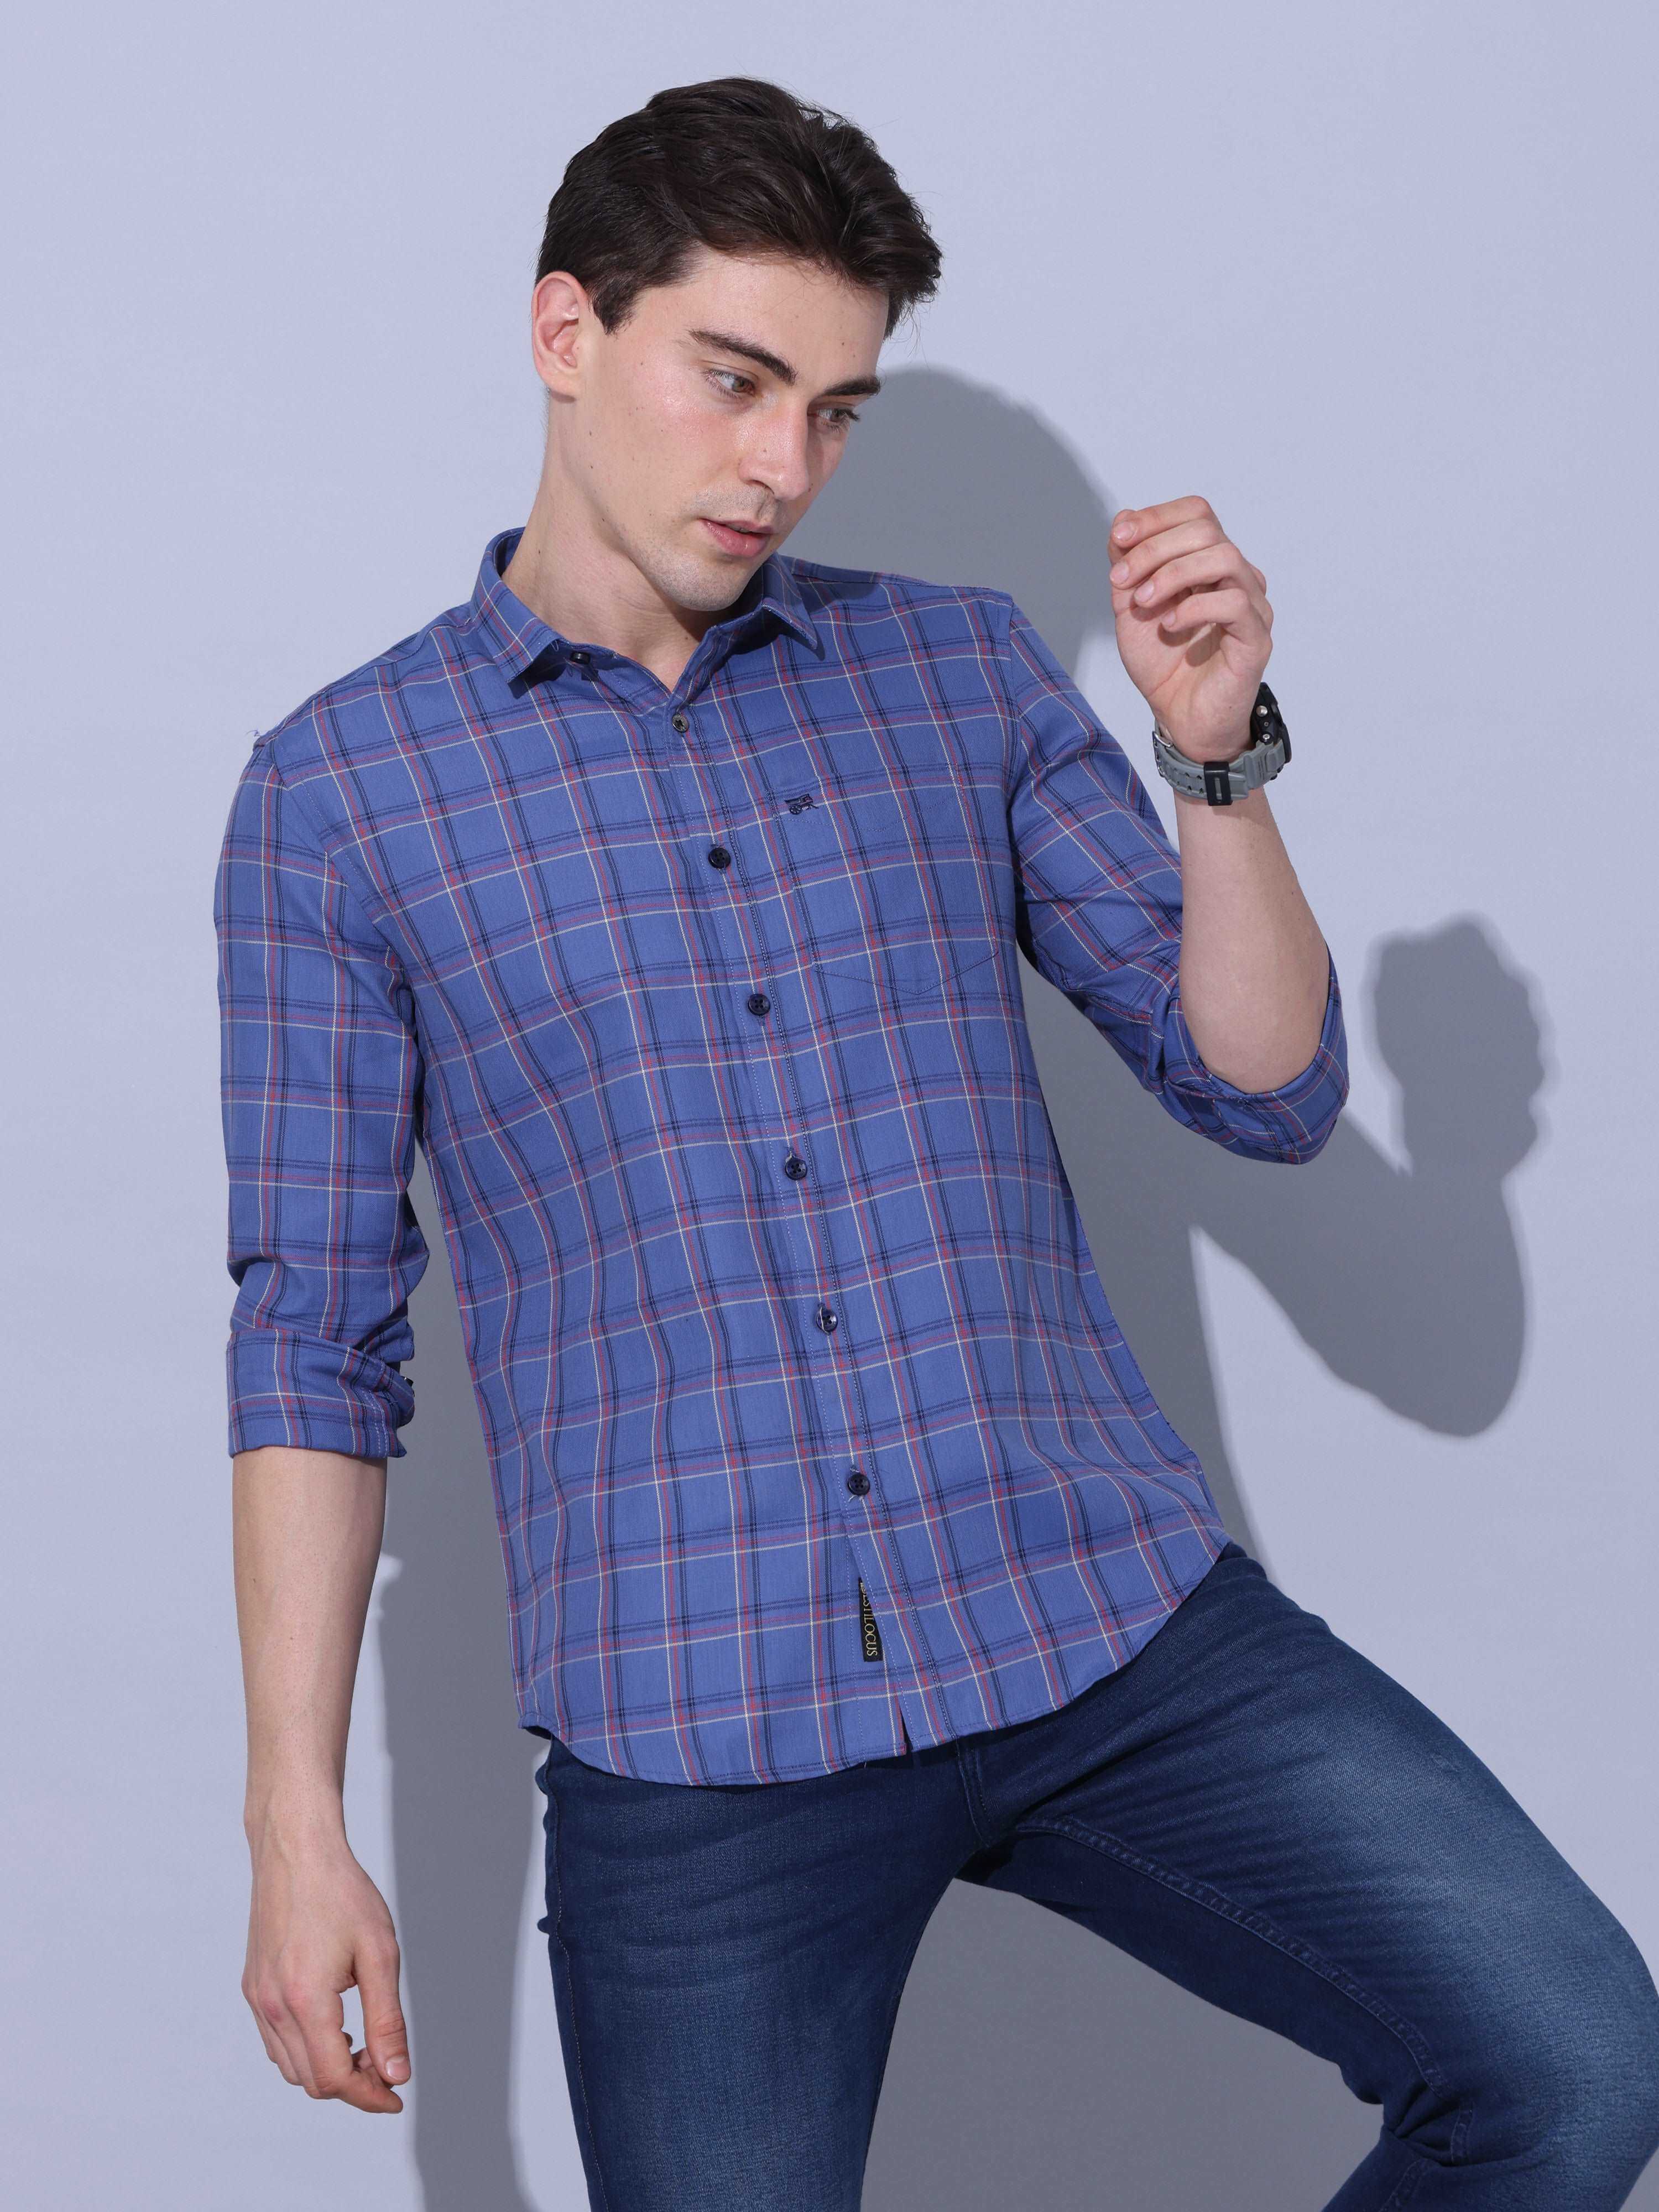 Blue Check Full Sleeve Casual Shirt shop online at Estilocus. • Full-sleeve check shirt with regular collar • Double button square cuff • Single pocket with logo embroidery • Curved hemline • Finest quality sewing • Machine wash care • Suitable to wear wi